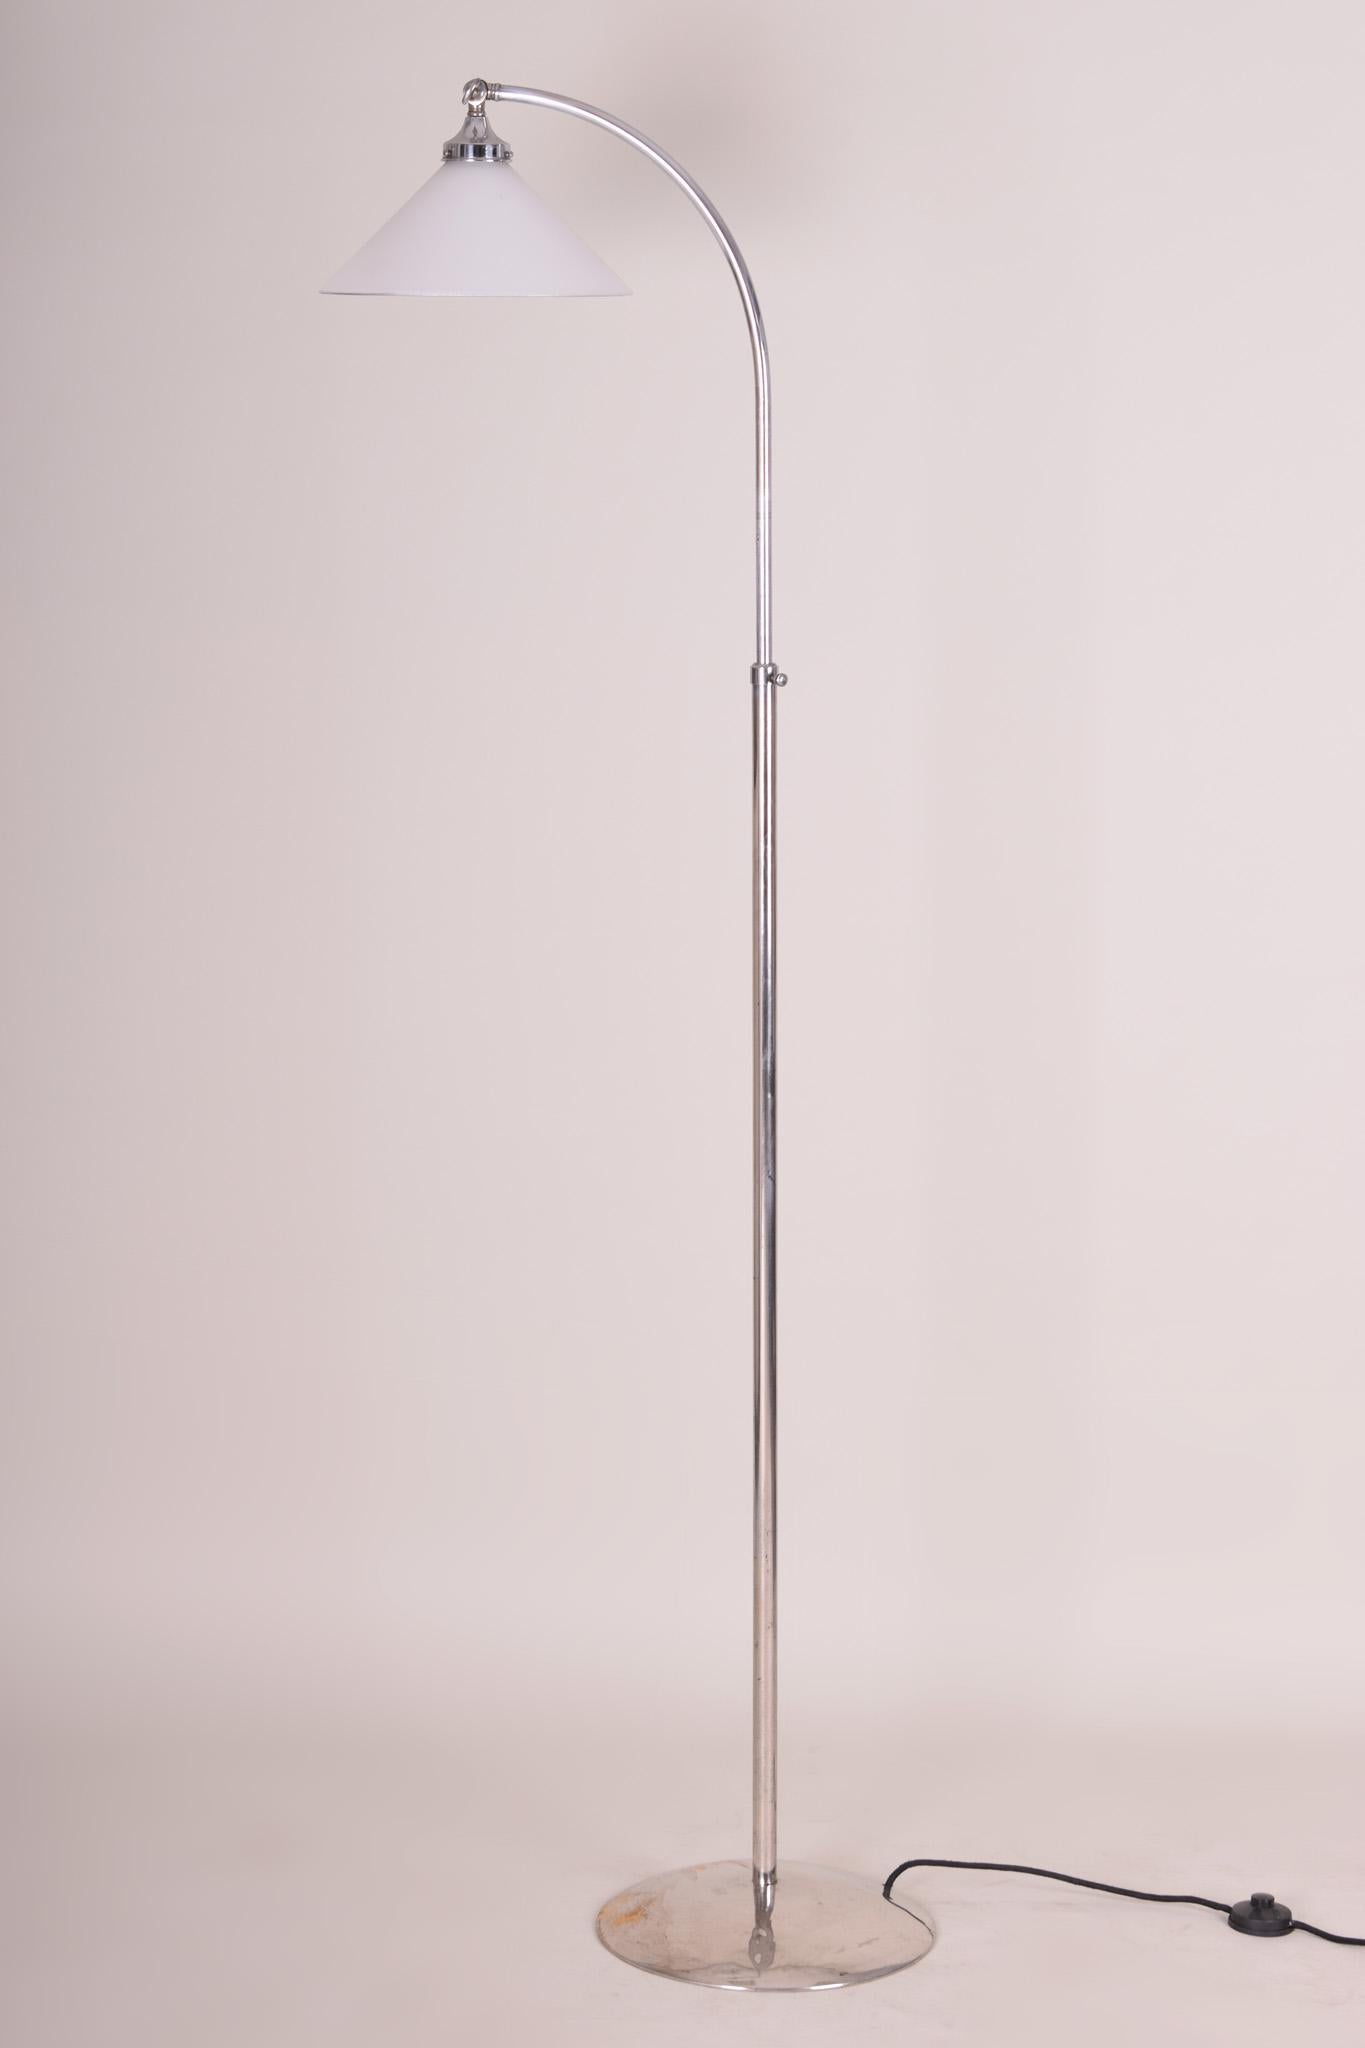 Chrome floor lamp.
Style: Functionalism.
Period: 1930-1939.
Adjustable height of the light.
    